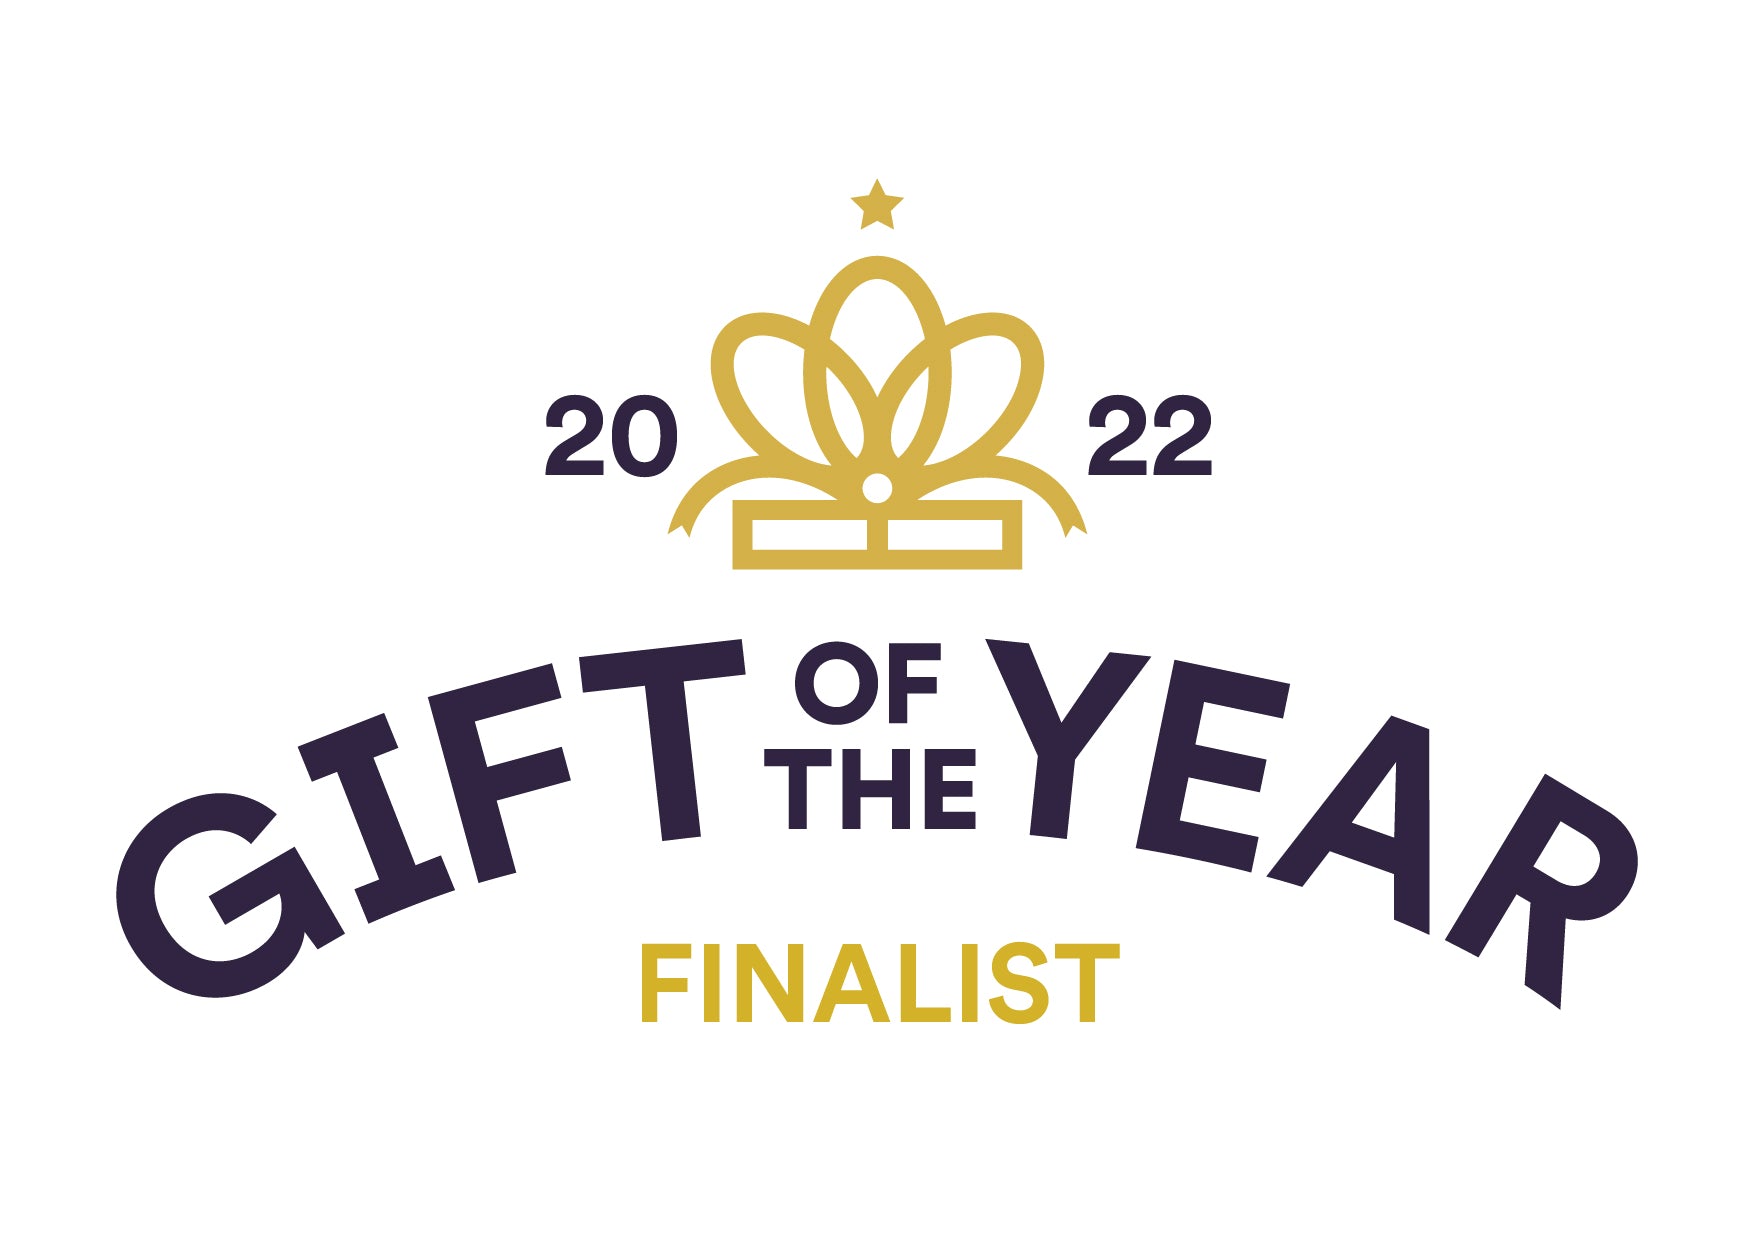 We are a Gift of the Year Finalist!